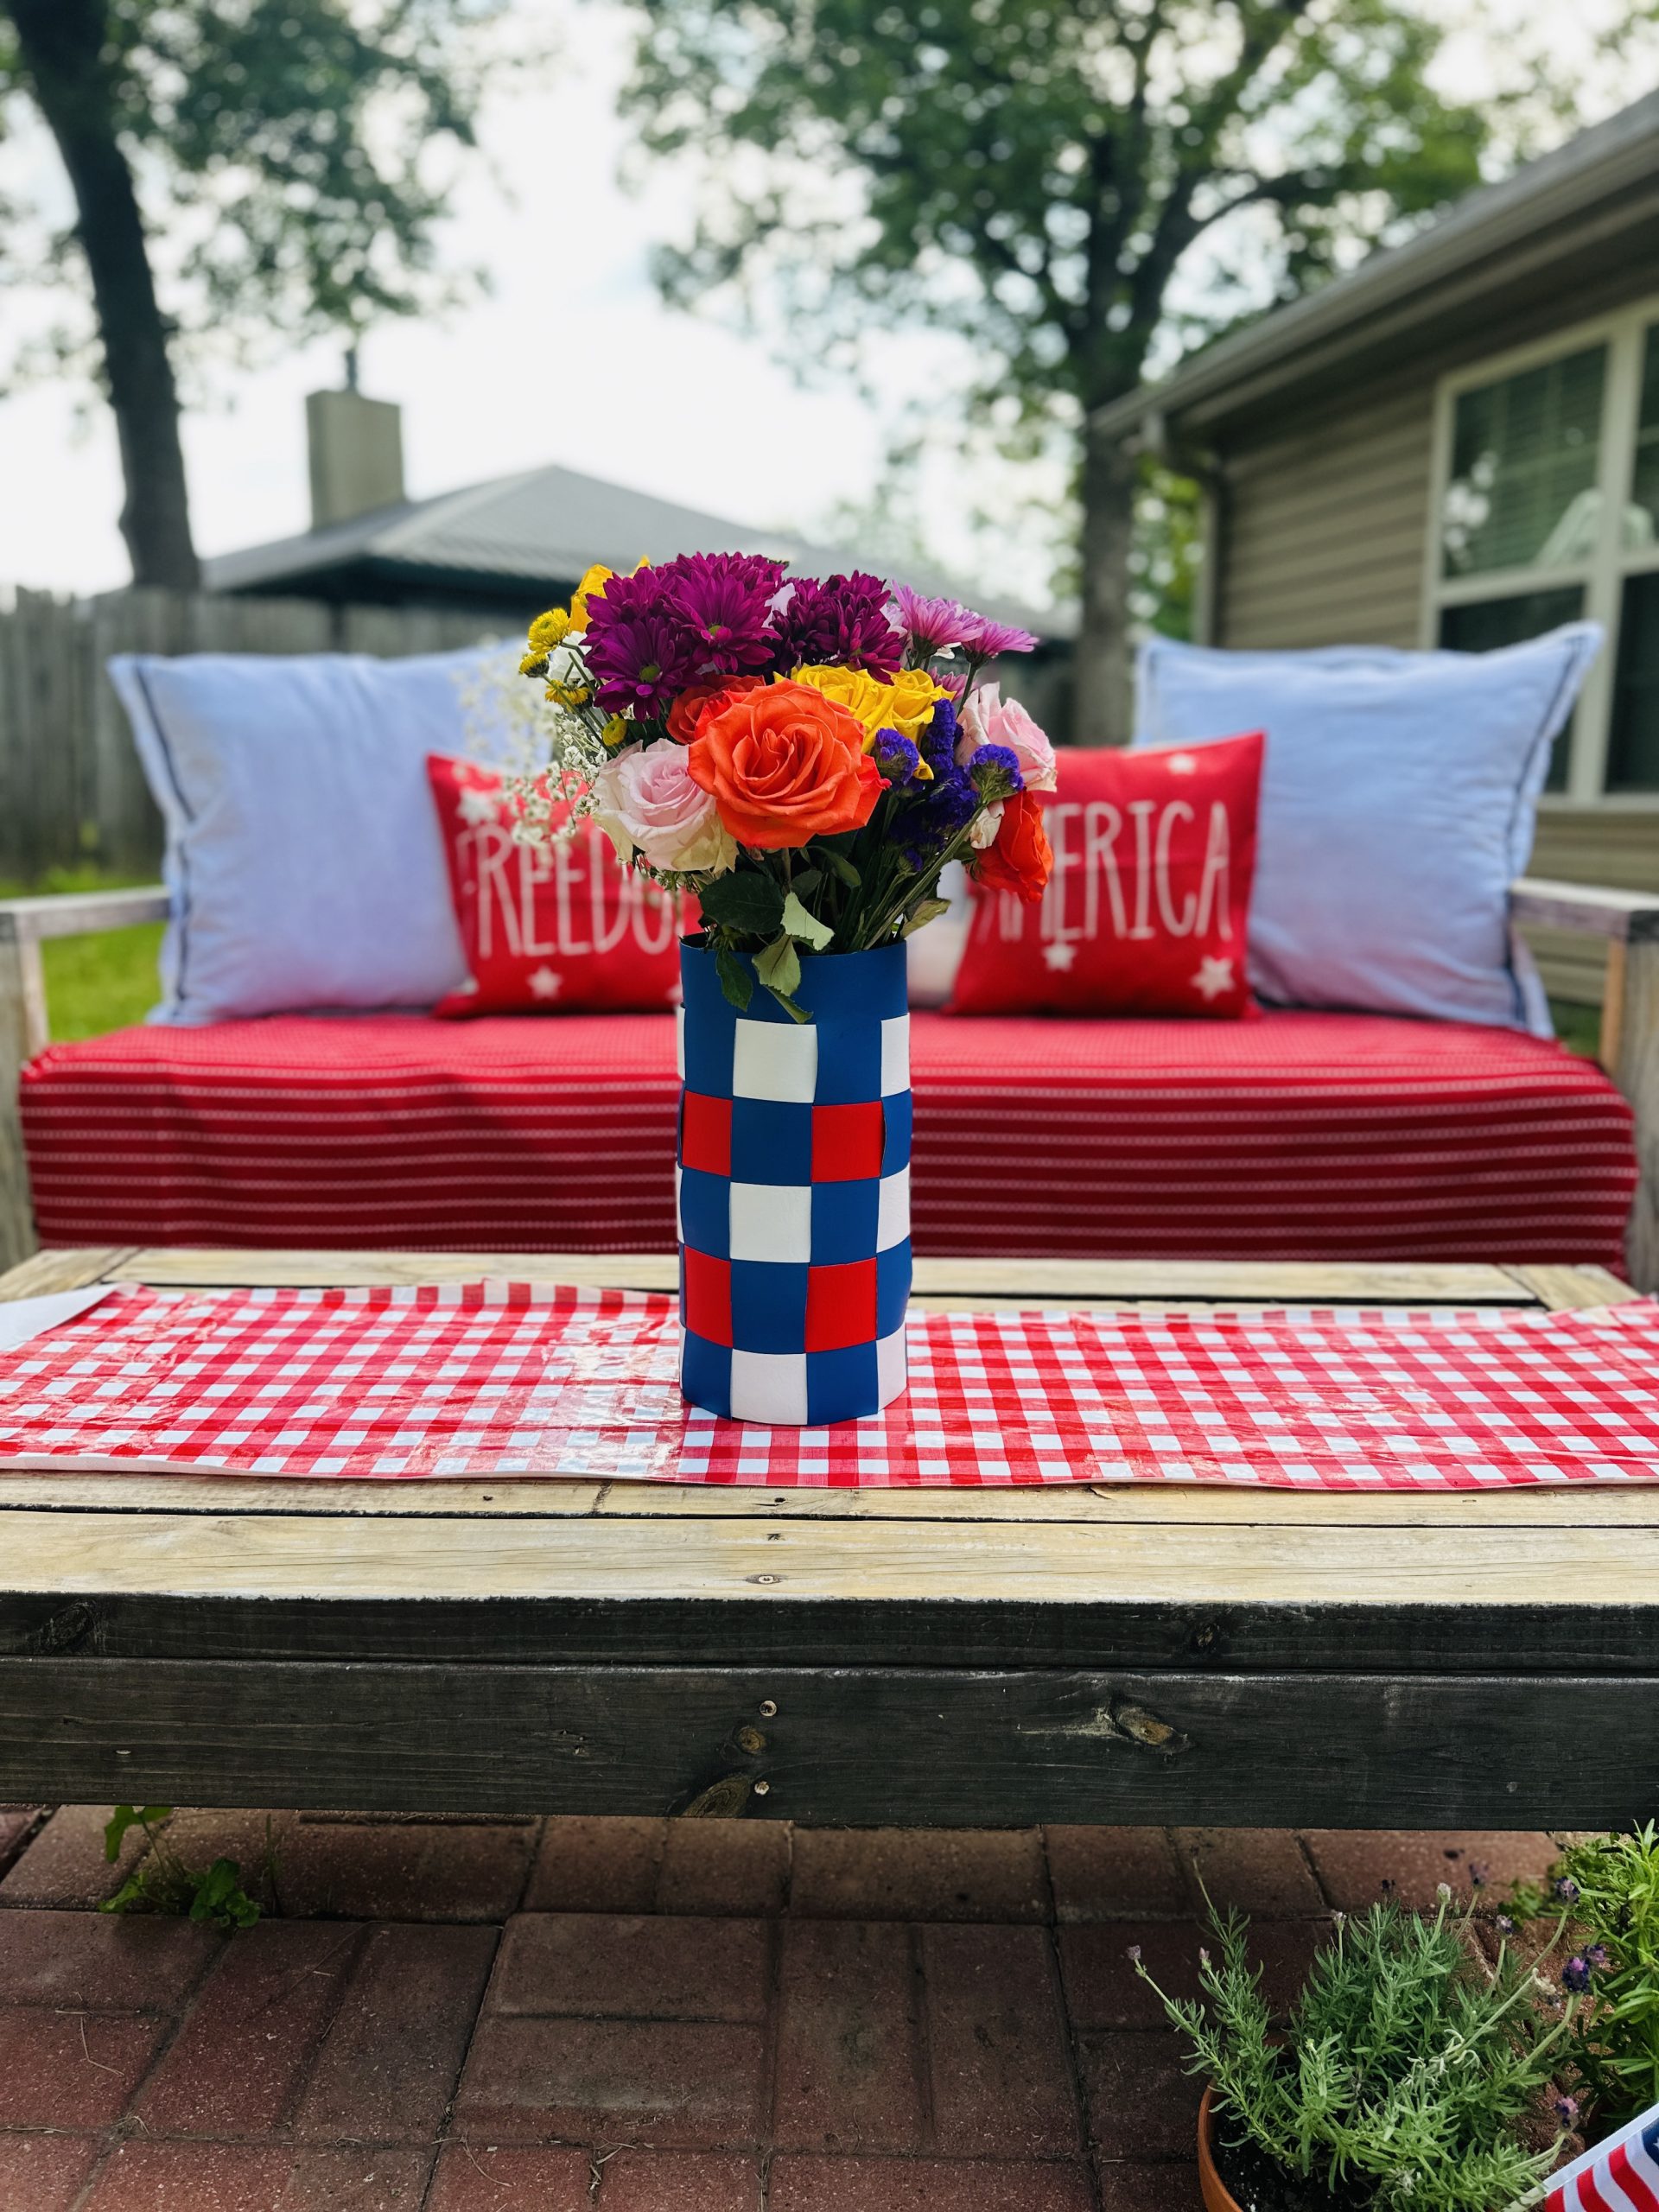 How to Make a Red White and Blue Patriotic Basket Vase